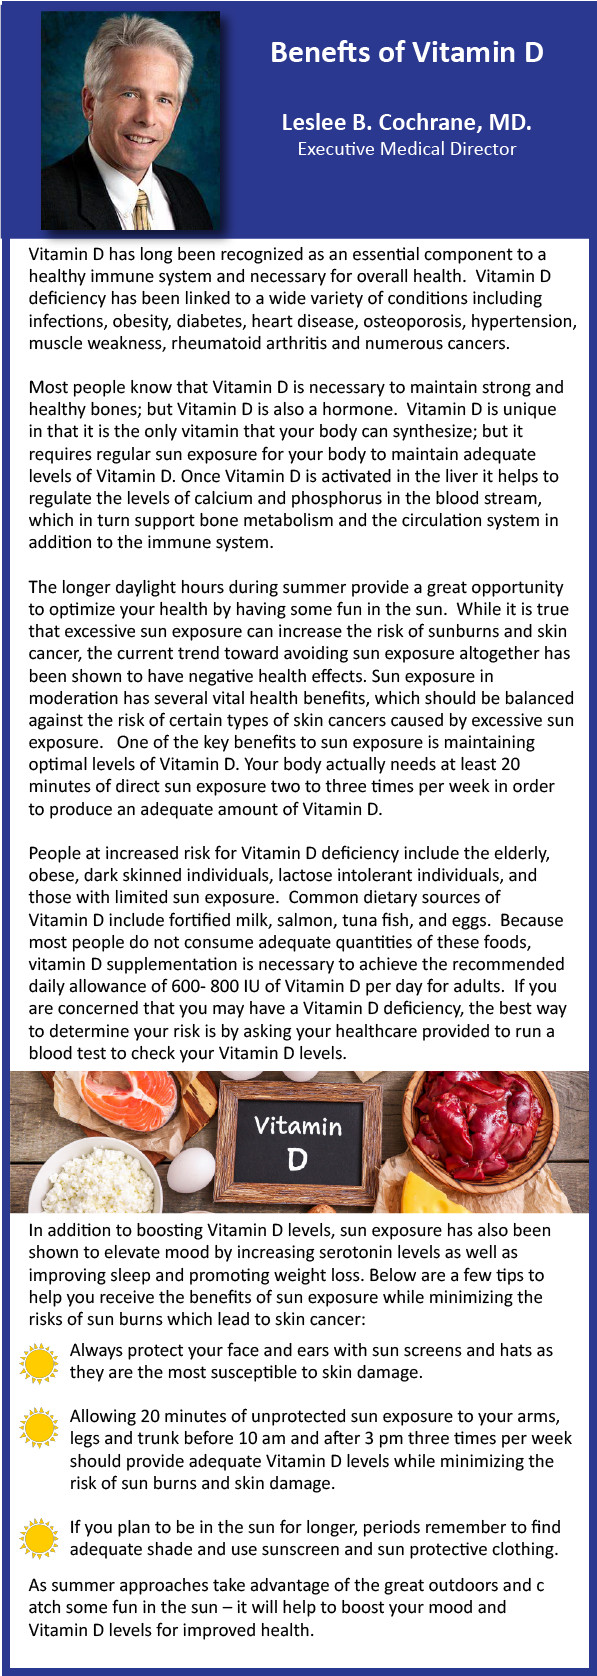 Benefits of Vitamin D Leslee B. Cochrane, MD. Executive Medical Director Vitamin D has long been recognized as an essential component to a healthy immune system and necessary for overall health. Vitamin D deficiency has been linked to a wide variety of conditions including infections, obesity, diabetes, heart disease, osteoporosis, hypertension, muscle weakness, rheumatoid arthritis and numerous cancers. Most people know that Vitamin D is necessary to maintain strong and healthy bones; but Vitamin D is also a hormone. Vitamin D is unique in that it is the only vitamin that your body can synthesize; but it requires regular sun exposure for your body to maintain adequate levels of Vitamin D. Once Vitamin D is activated in the liver it helps to regulate the levels of calcium and phosphorus in the blood stream which in turn support bone metabolism and the circulation system in addition to the immune system. The longer daylight hours during summer provide a great opportunity to optimize your health by having some fun in the sun. While it is true that excessive sun exposure can increase the risk of sunburns and skin cancer, the current trend toward avoiding sun exposure altogether has been shown to have negative health effects. Sun exposure in moderation has several vital health benefits, which should be balanced against the risk of certain types of skin cancers caused by excessive sun exposure. One of the key benefits to sun exposure is maintaining optimal levels of Vitamin D. Your body actually needs at least 20 minutes of direct sun exposure two to three times per week in order to produce an adequate amount of Vitamin D. People at increased risk for Vitamin D deficiency include the elderly, obese, dark skinned individuals, lactose intolerant individuals, and those with limited sun exposure. Common dietary sources of Vitamin D include fortified milk, salmon, tuna fish, and eggs. Because most people do not consume adequate quantities of these foods, vitamin D supplementation is necessary to achieve the recommended daily allowance of 600-800 IU of Vitamin D per day for adults. If you are concerned that you may have a Vitamin D deficiency, the best way to determine your risk is by asking your healthcare provider to run a blood test to check your Vitamin D levels. In addition to boosting Vitamin D levels, sun exposure has also been shown to elevate mood by increasing serotonin levels as well as improving sleep and promoting weight loss. Below are a few tips to help you receive the benefits of sun exposure while minimizing the risks of sun burns which lead to skin cancer. Always protect your face and ears with sun screens and hats are they are the most susceptible to skin damage. Allowing 20 minutes of unprotected sun exposure to your arms, legs and trunk before 10 am and after 3 pm three times per week should provide adequate Vitamin D levels while minimizing the risk of sun burns and skin damage. If you plan to be in the sun for longer periods remember to find adequate shade and use sunscreen and sun protective clothing. As summer approaches take advantage of the great outdoors and catch some fun in the sun - it will help boost your mood and Vitamin D levels for improved health.